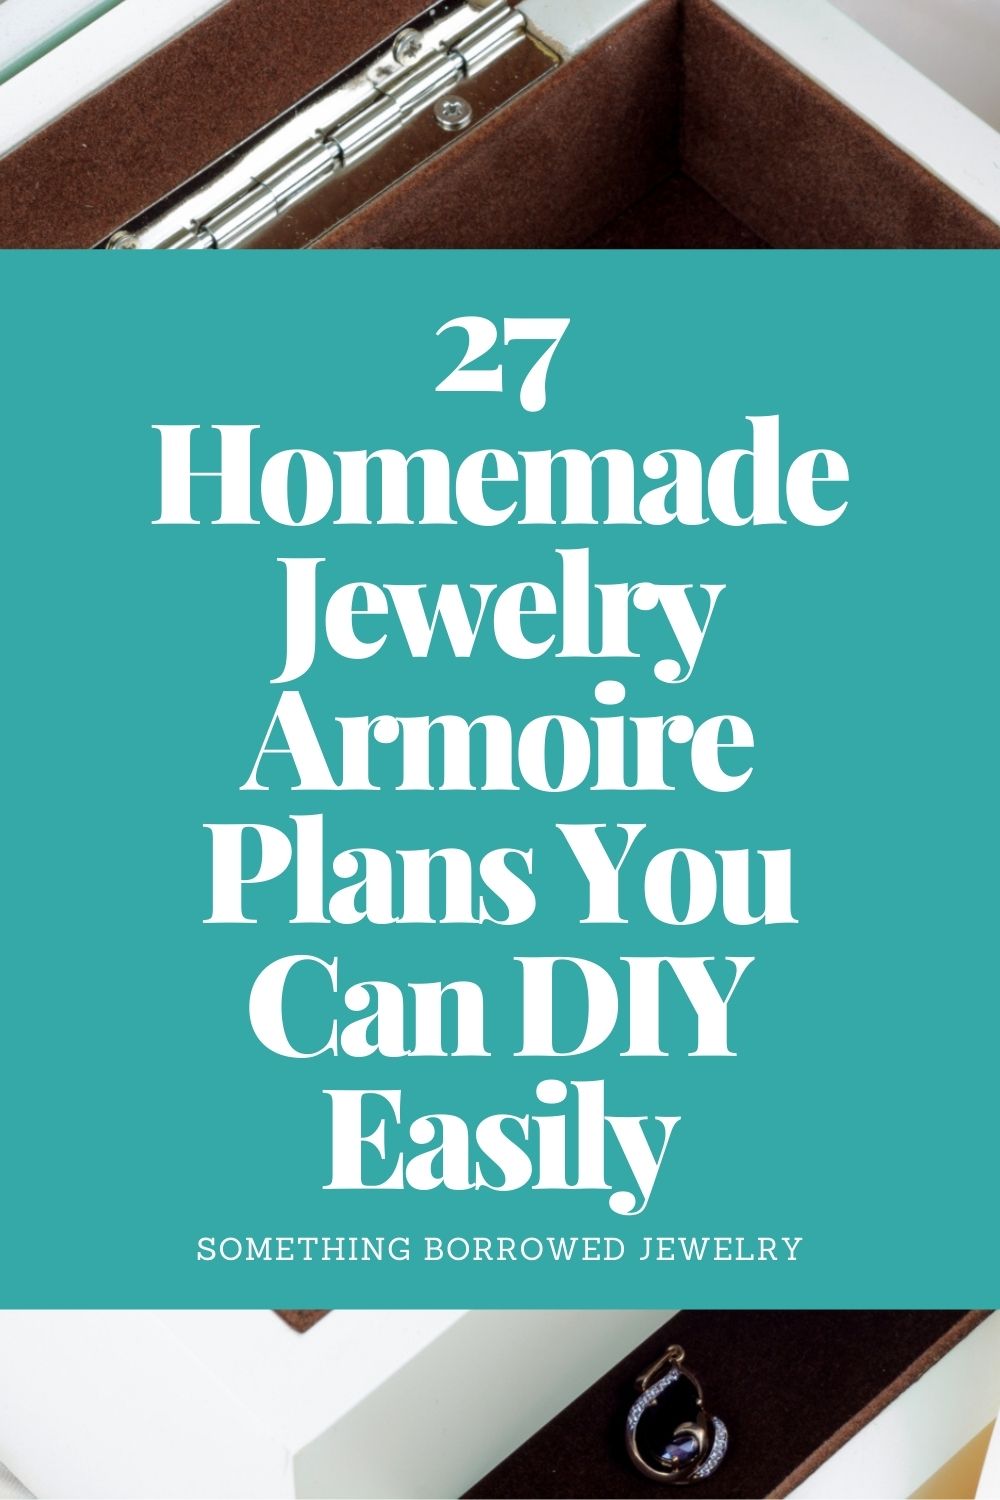 27 Homemade Jewelry Armoire Plans You Can DIY Easily pin 2